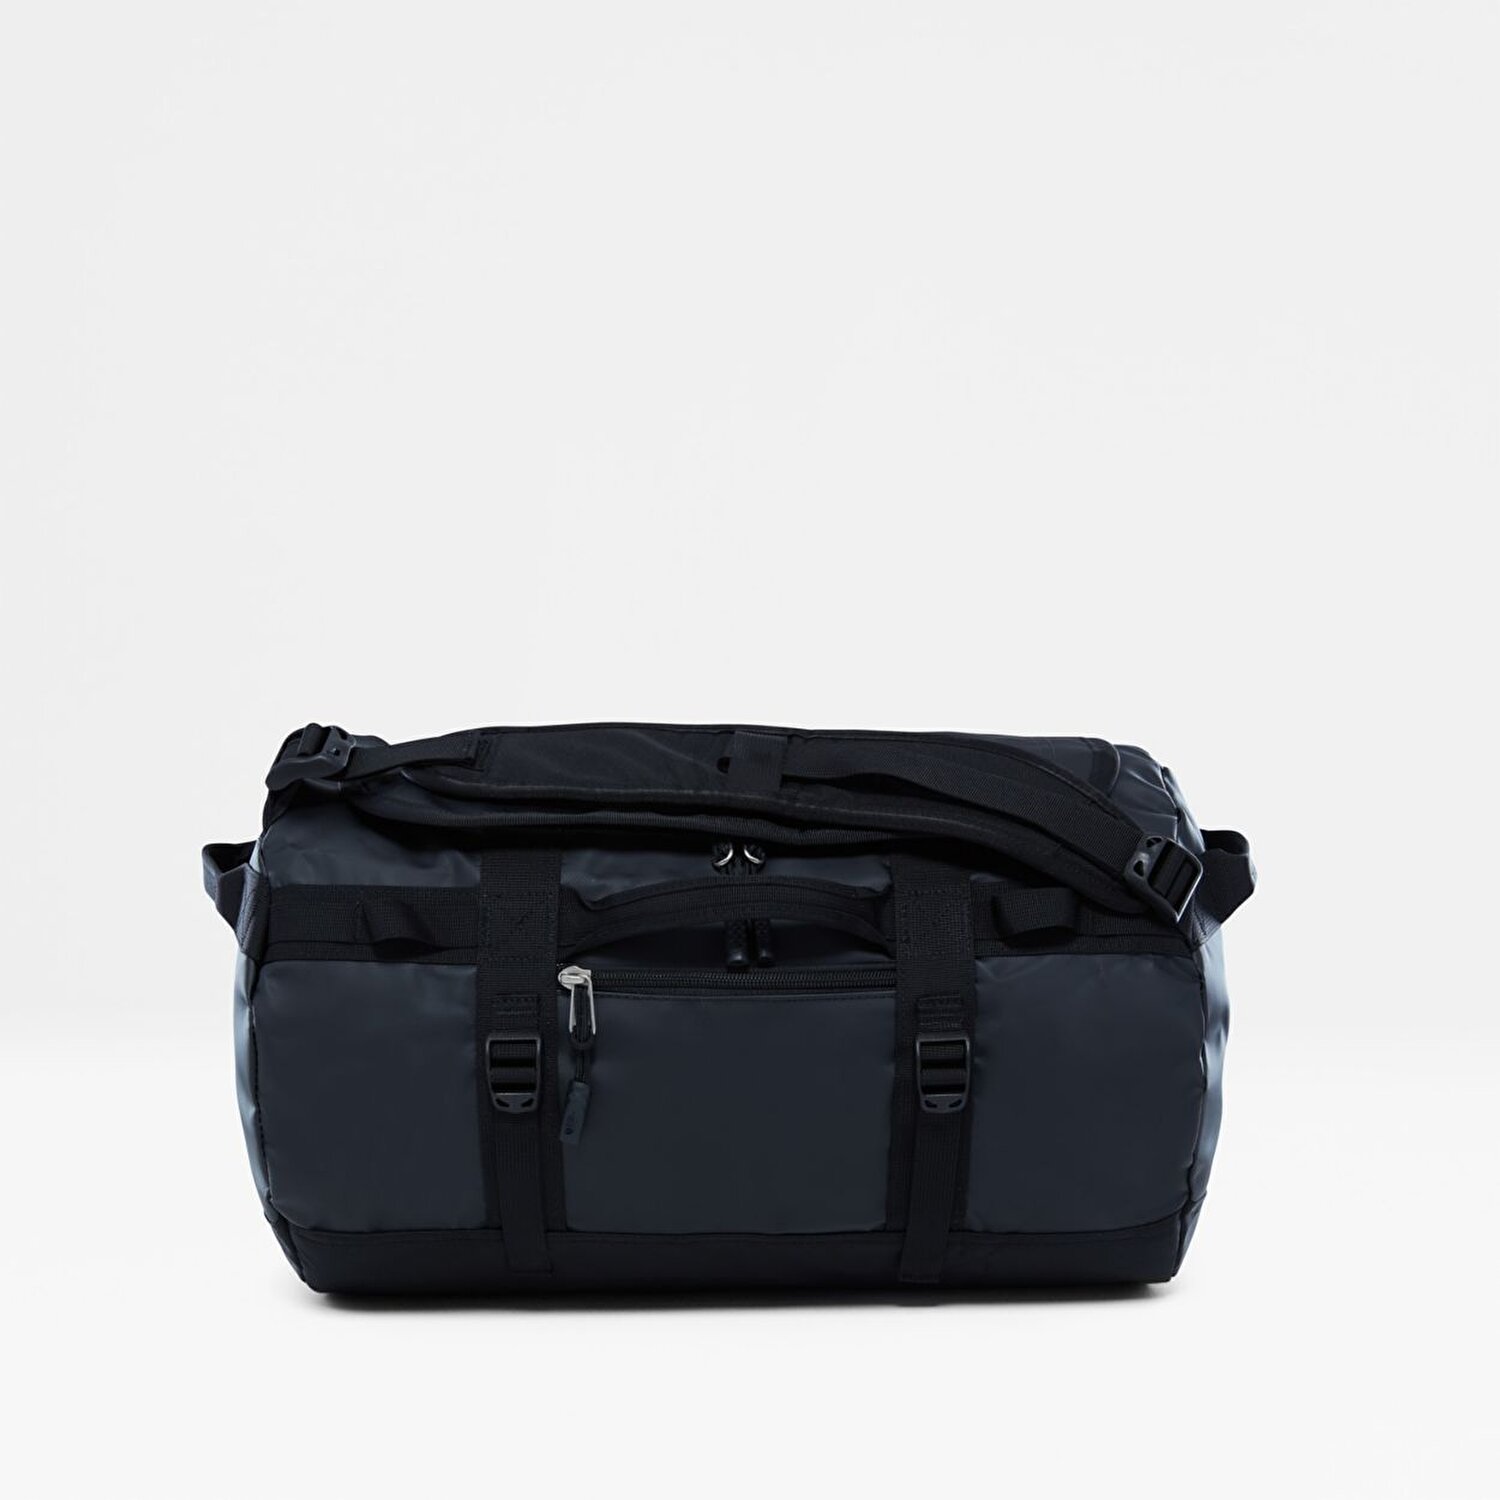 The North Face BASE CAMP DUFFEL - XS. 1